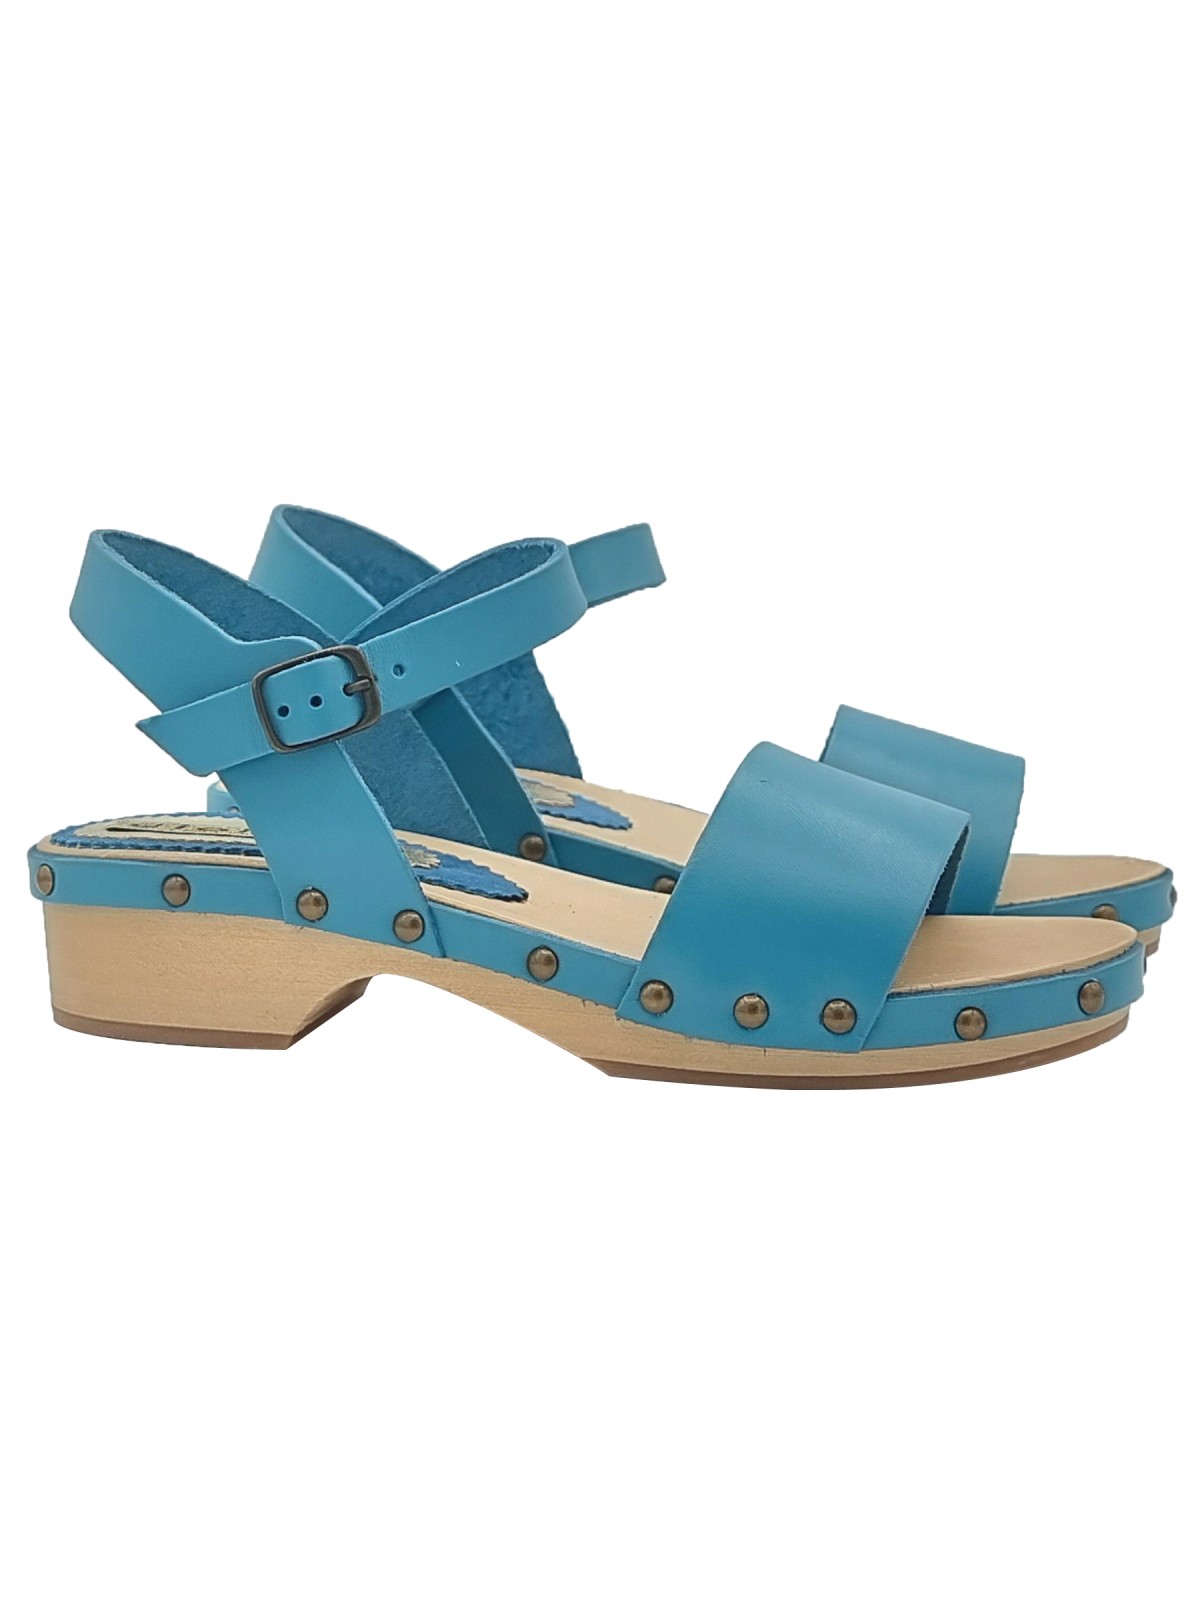 FLAT TURQUOISE SANDALS WITH STRAP